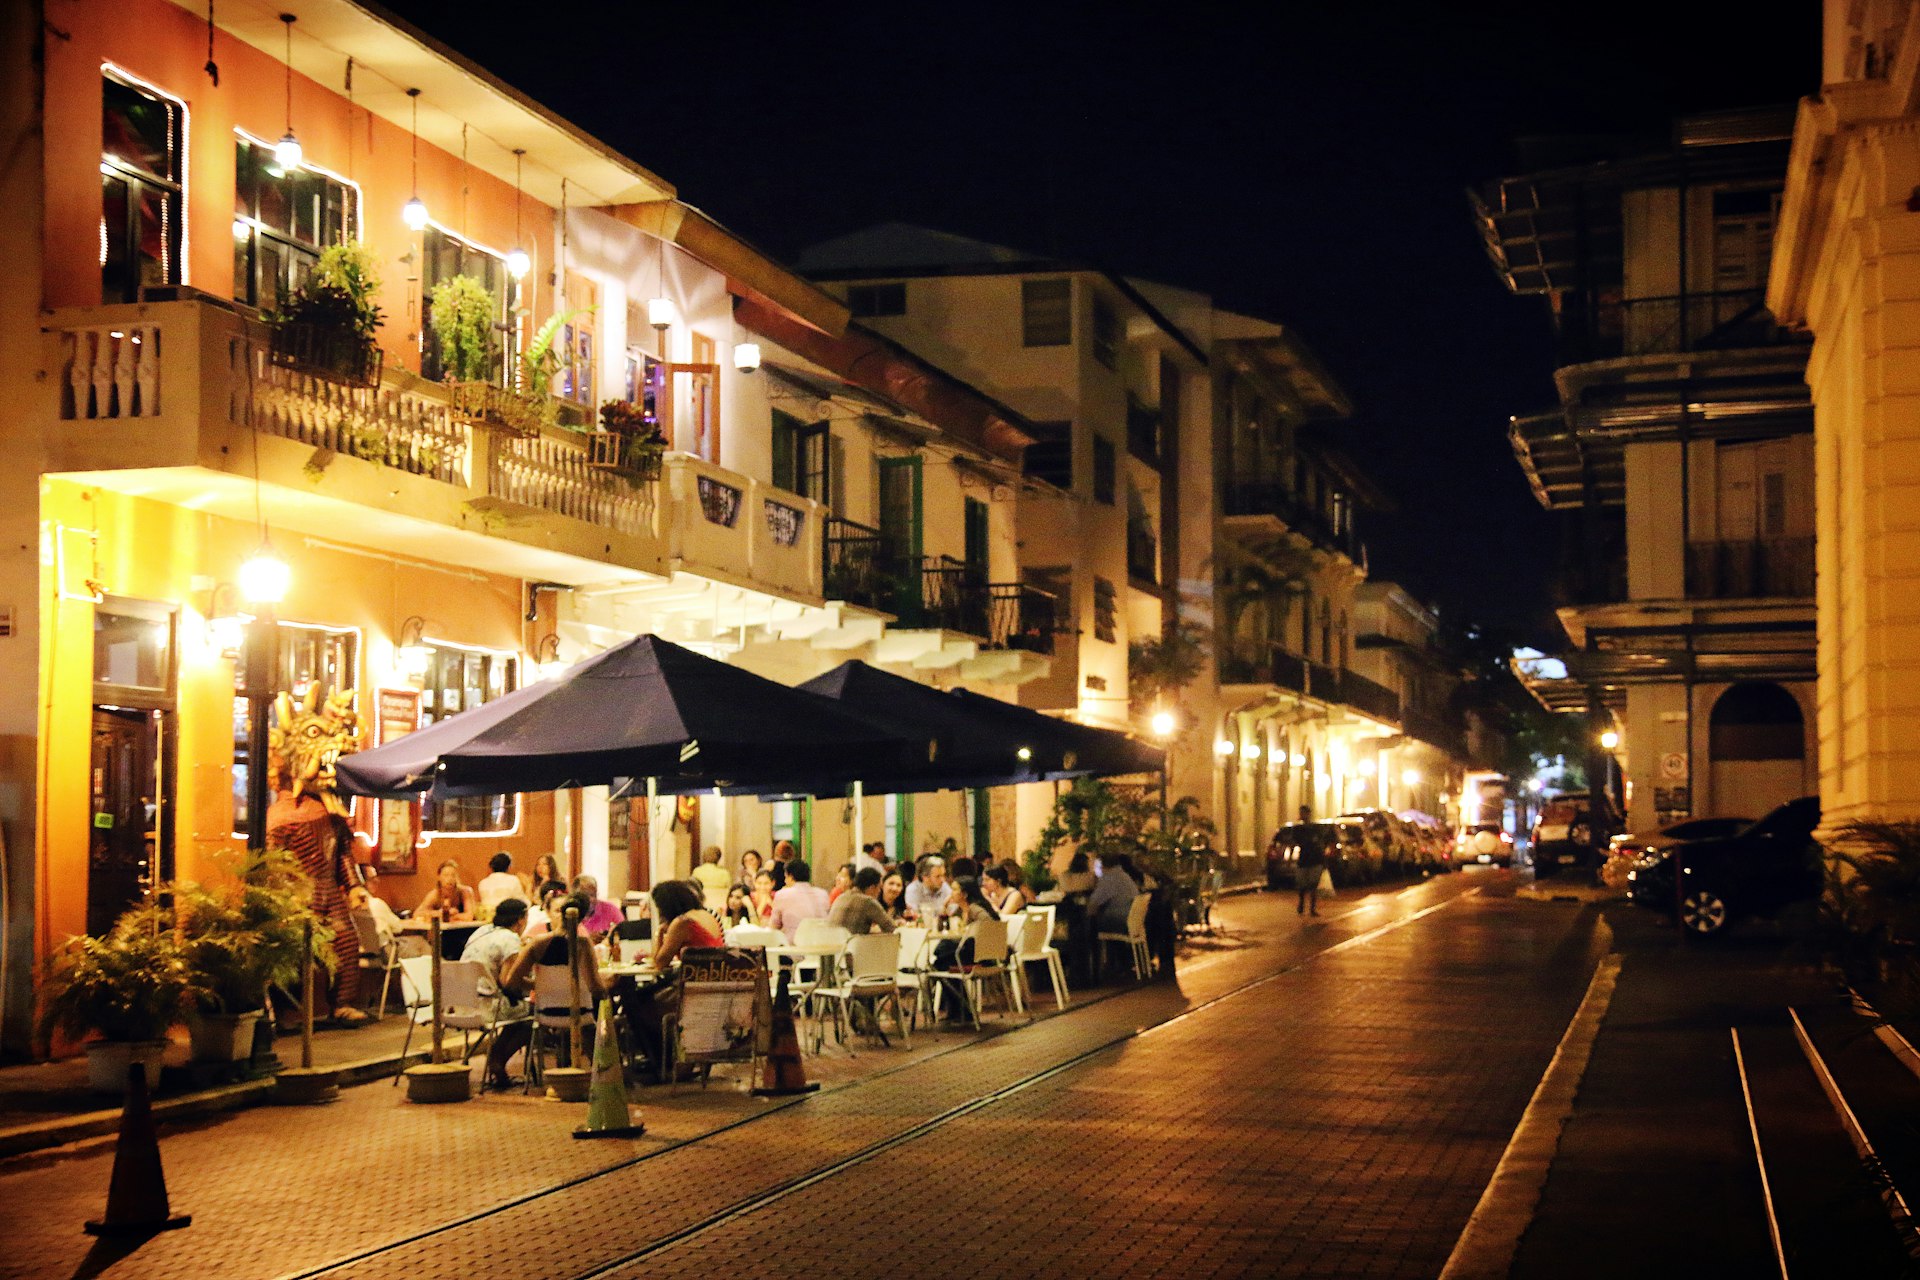 People at night, dining at outdoor tables with umbrellas in the quaint and historic surroundings along the streets of Panama's old quarter